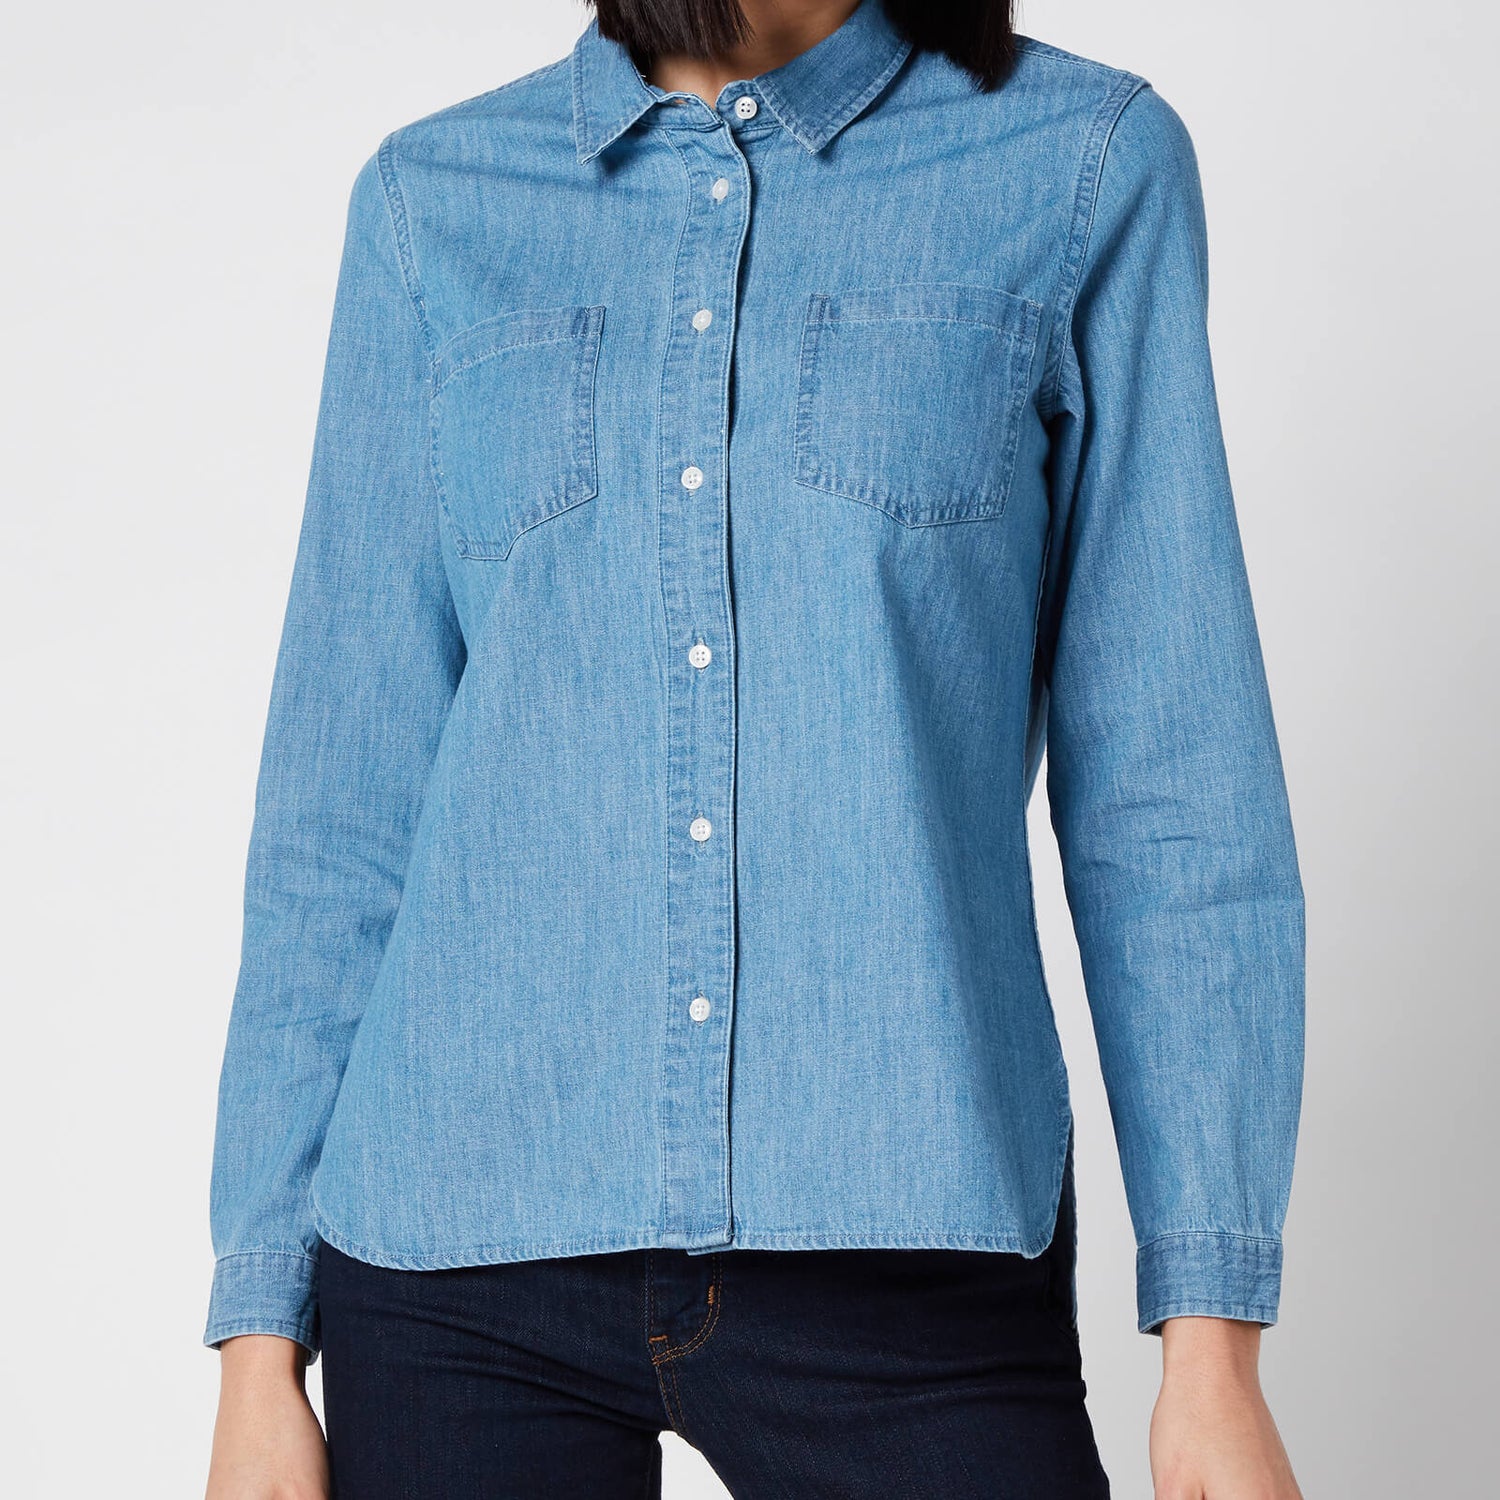 Barbour Women's Tynemouth Shirt - Authentic Wash